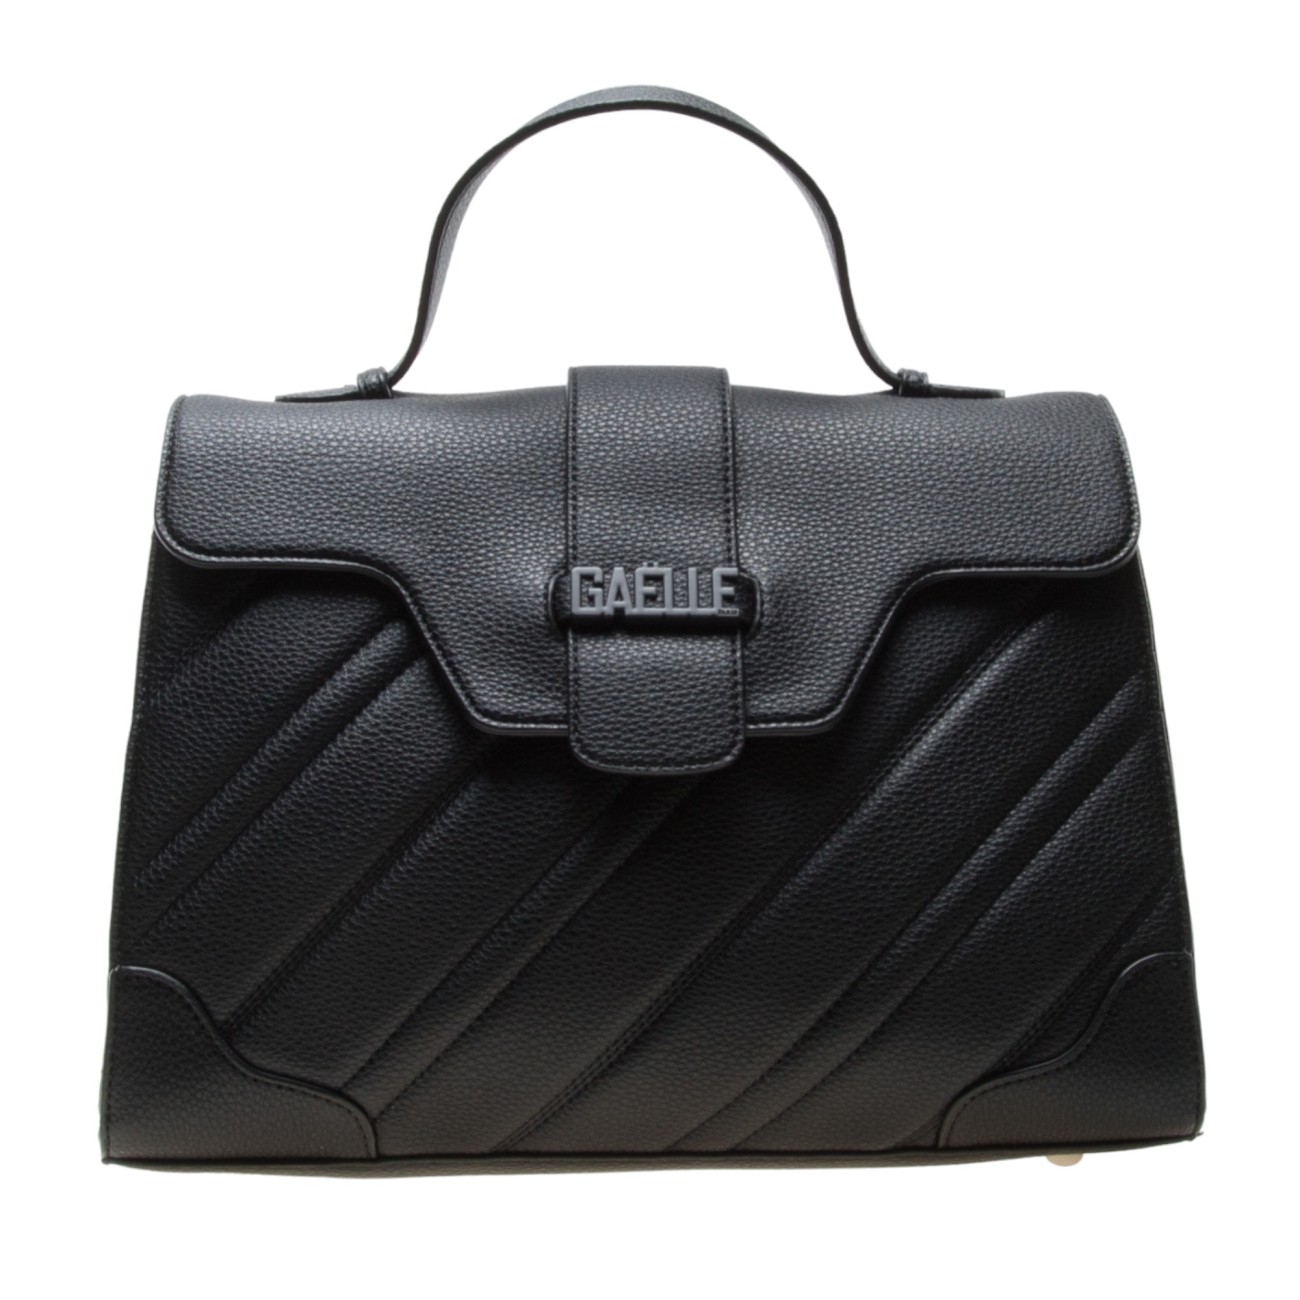 Gaelle maxi black quilted bag